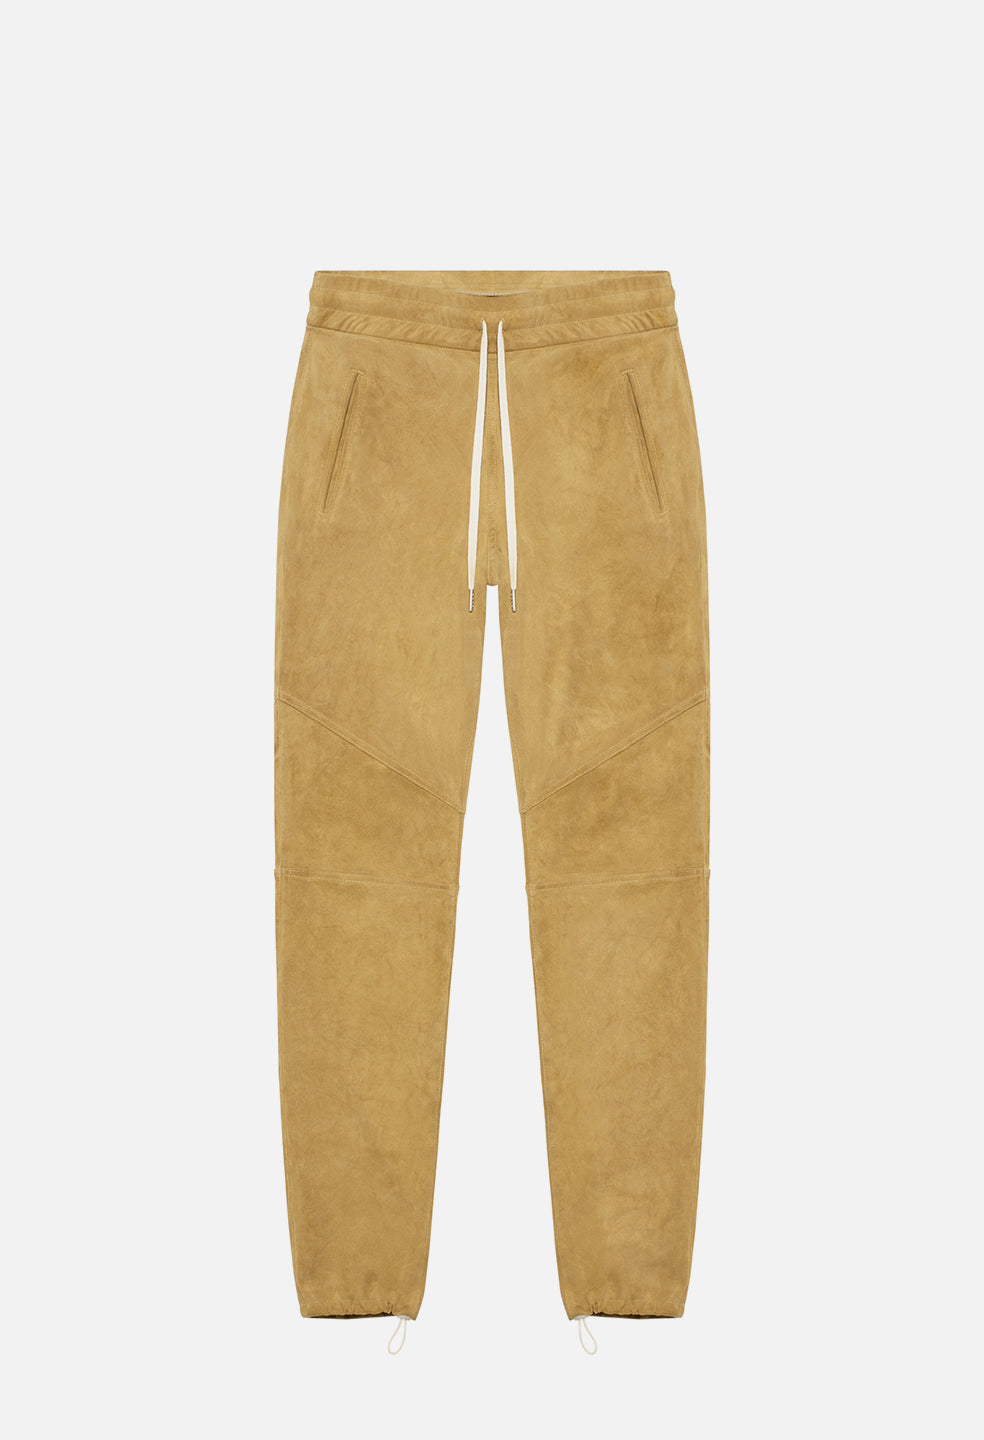 Leather Escobar Pants / Tan Suede